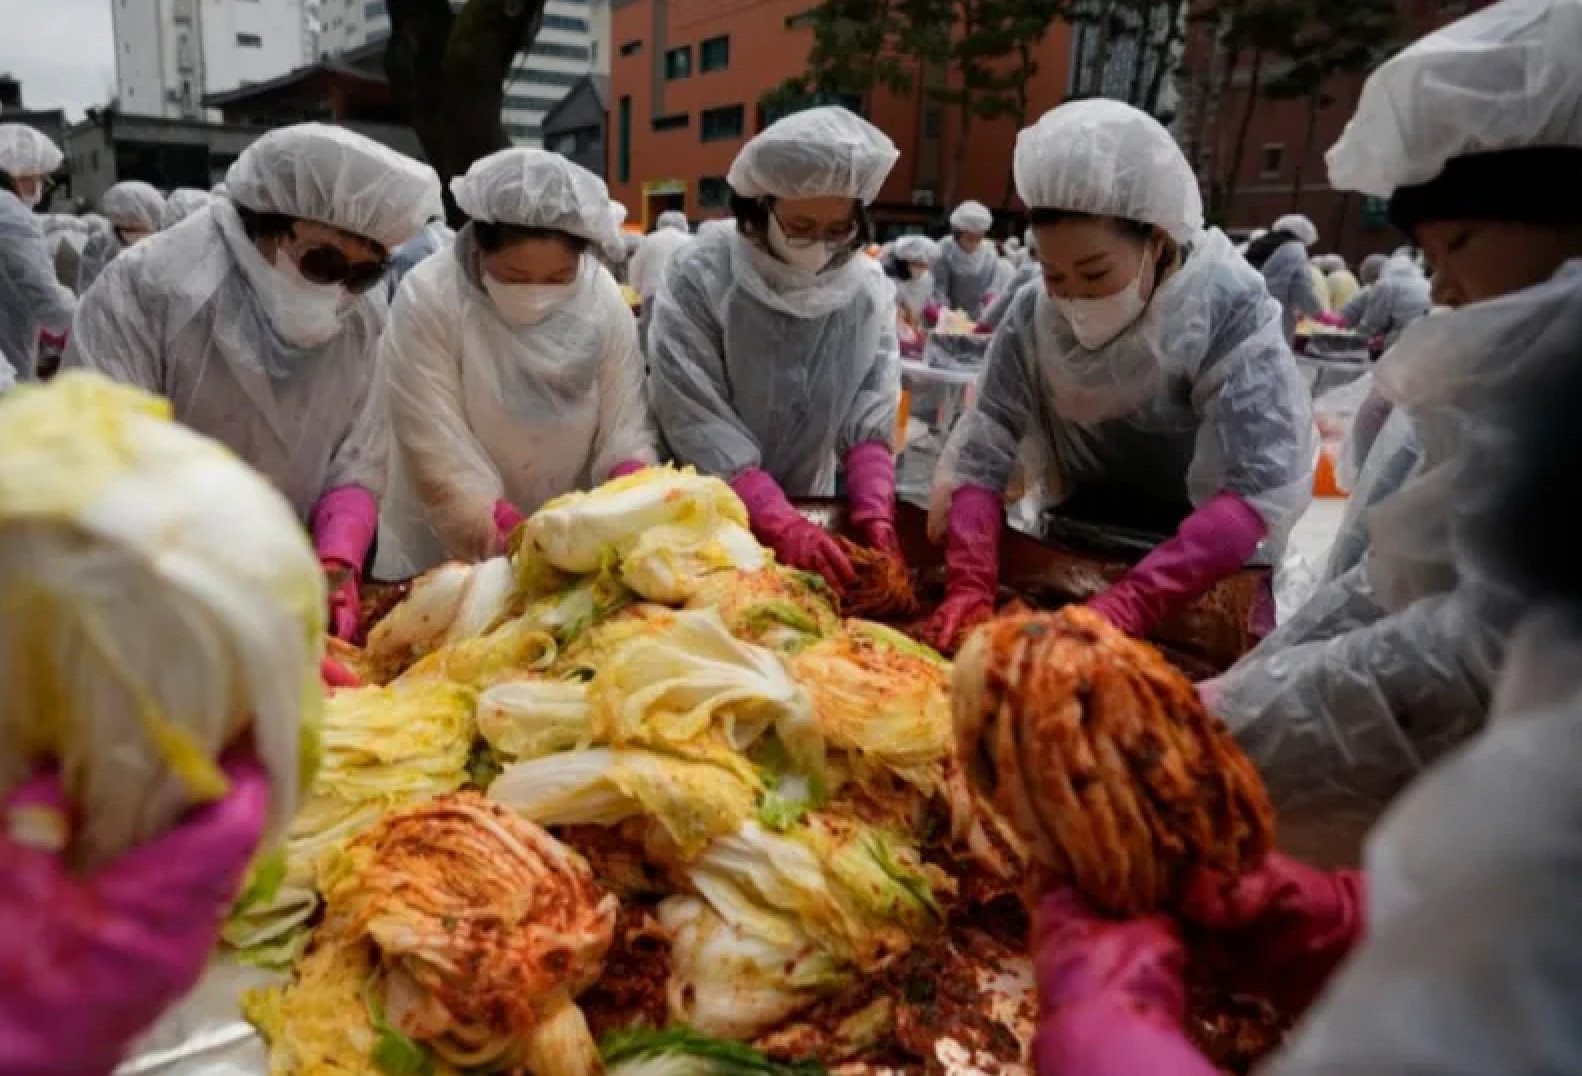 Women prepare cabbage at an Asian market. The food is given different names across the region. Photo: TVBS